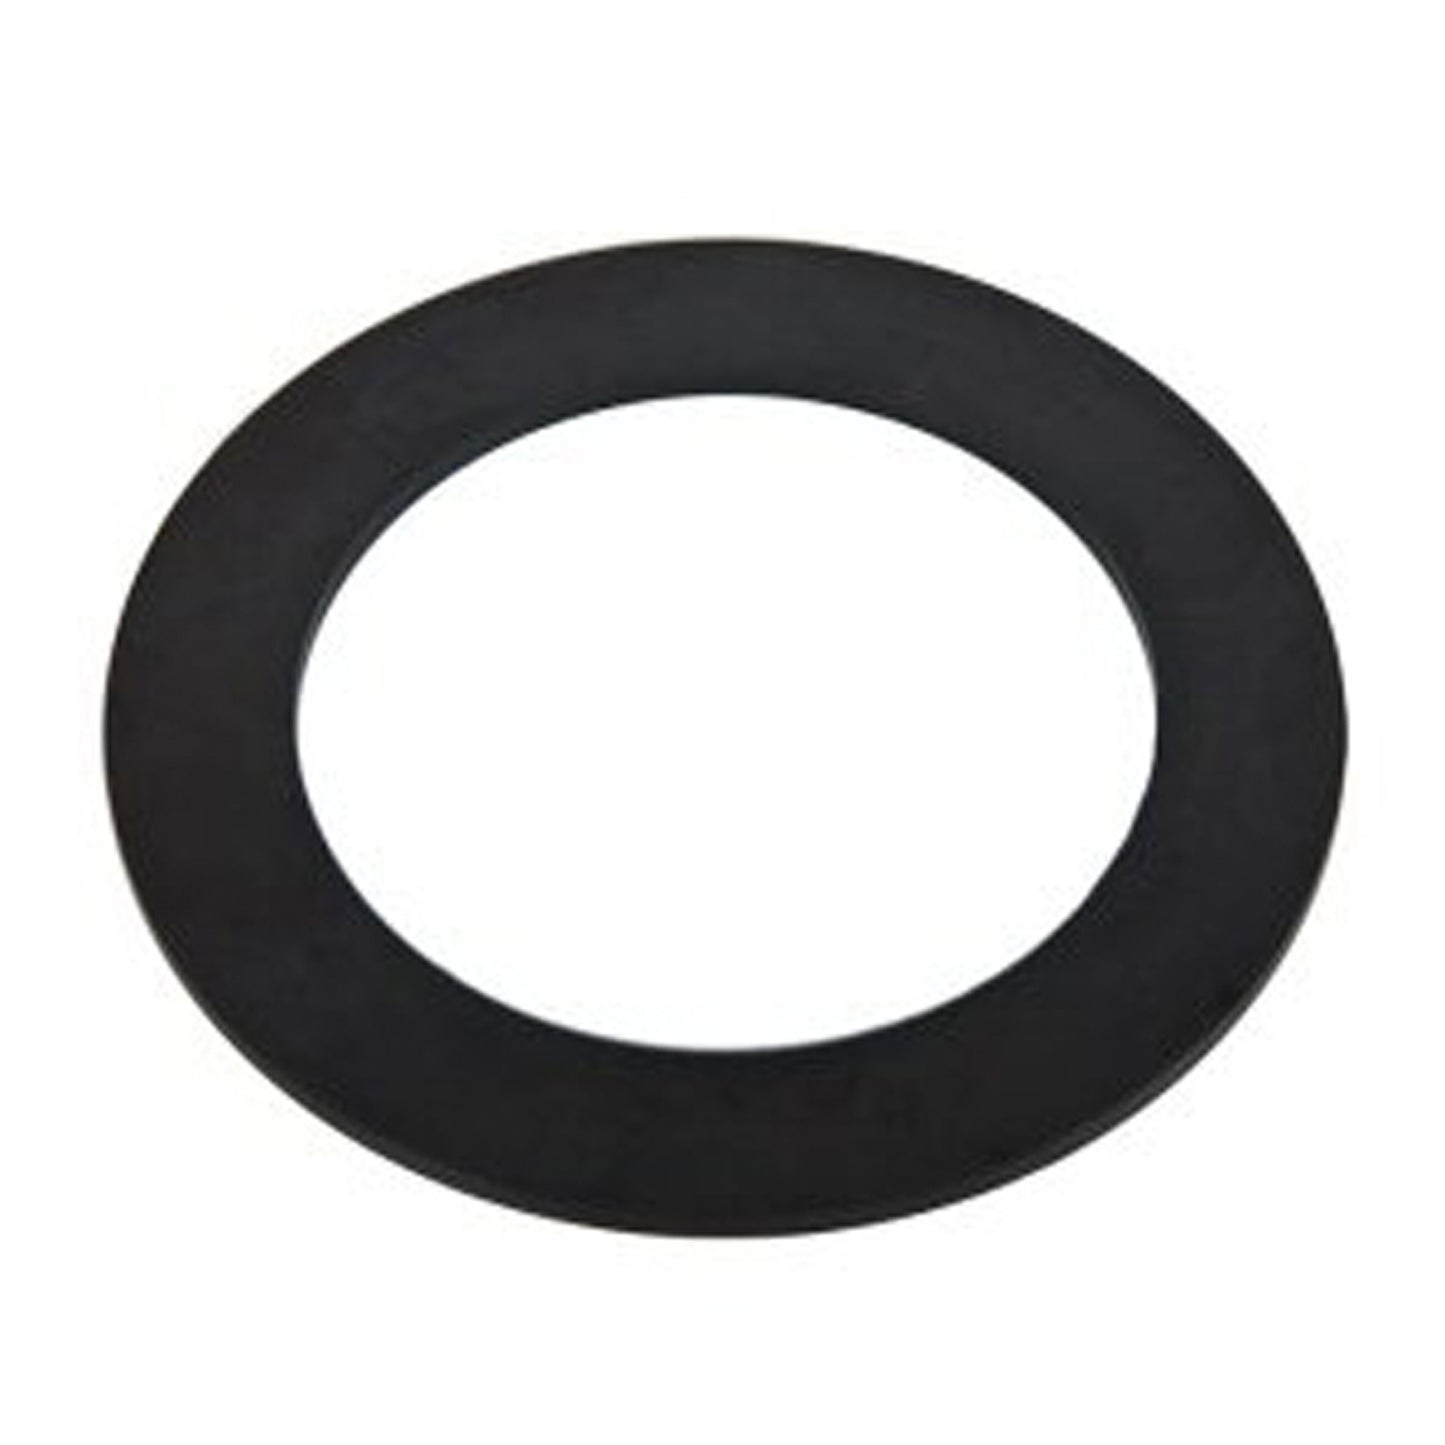 Intex Replacement Wall Gasket Flat Washer for Above Ground Pools 10255